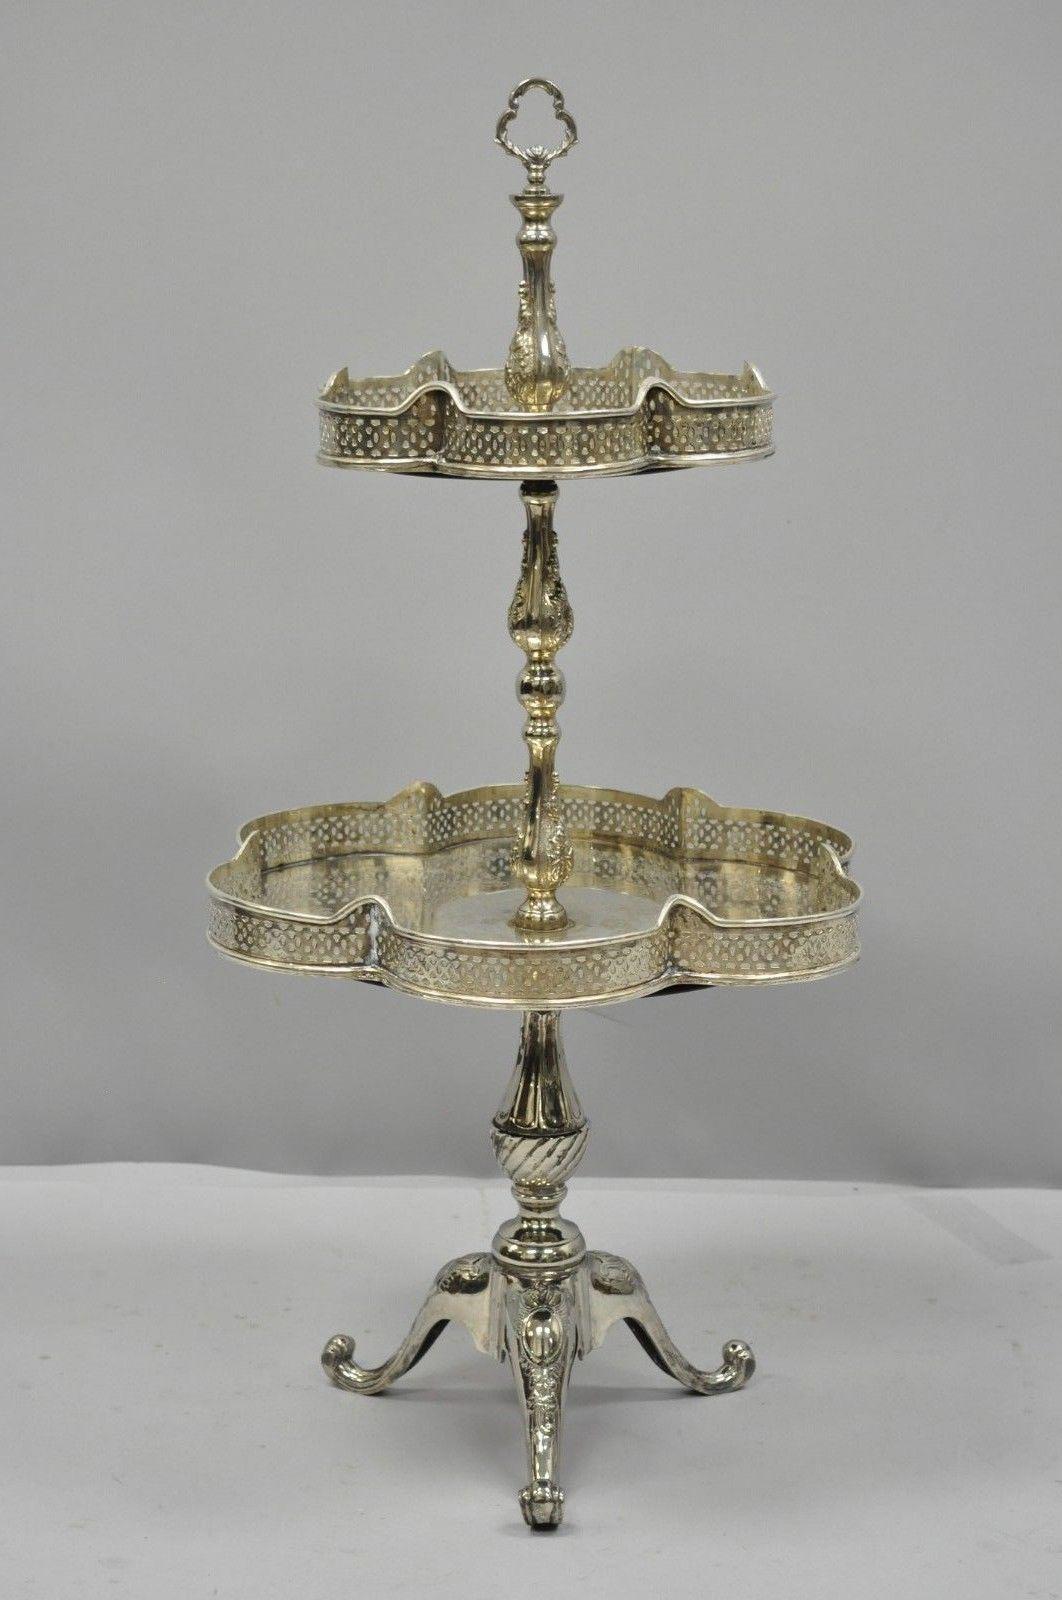 2-Tier Silver Plated Regency Style Dessert Tray Stand Platter Centerpiece Tazza 3